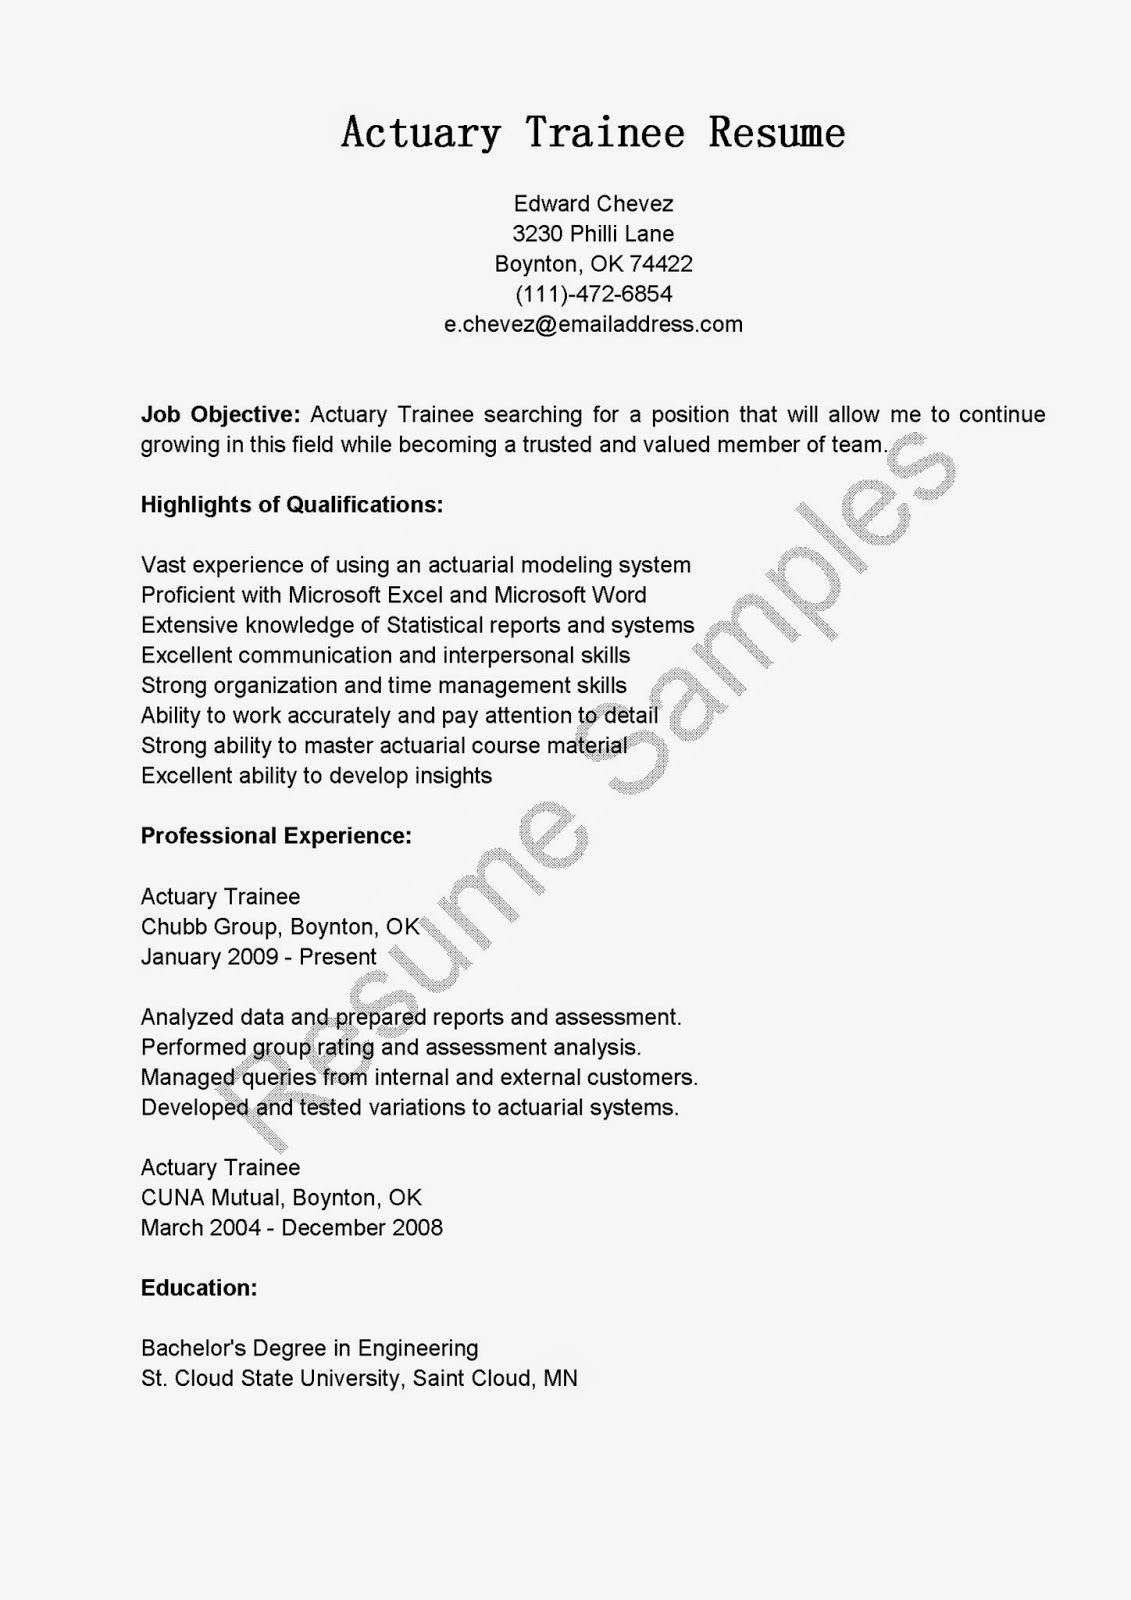 Actuary resume samples